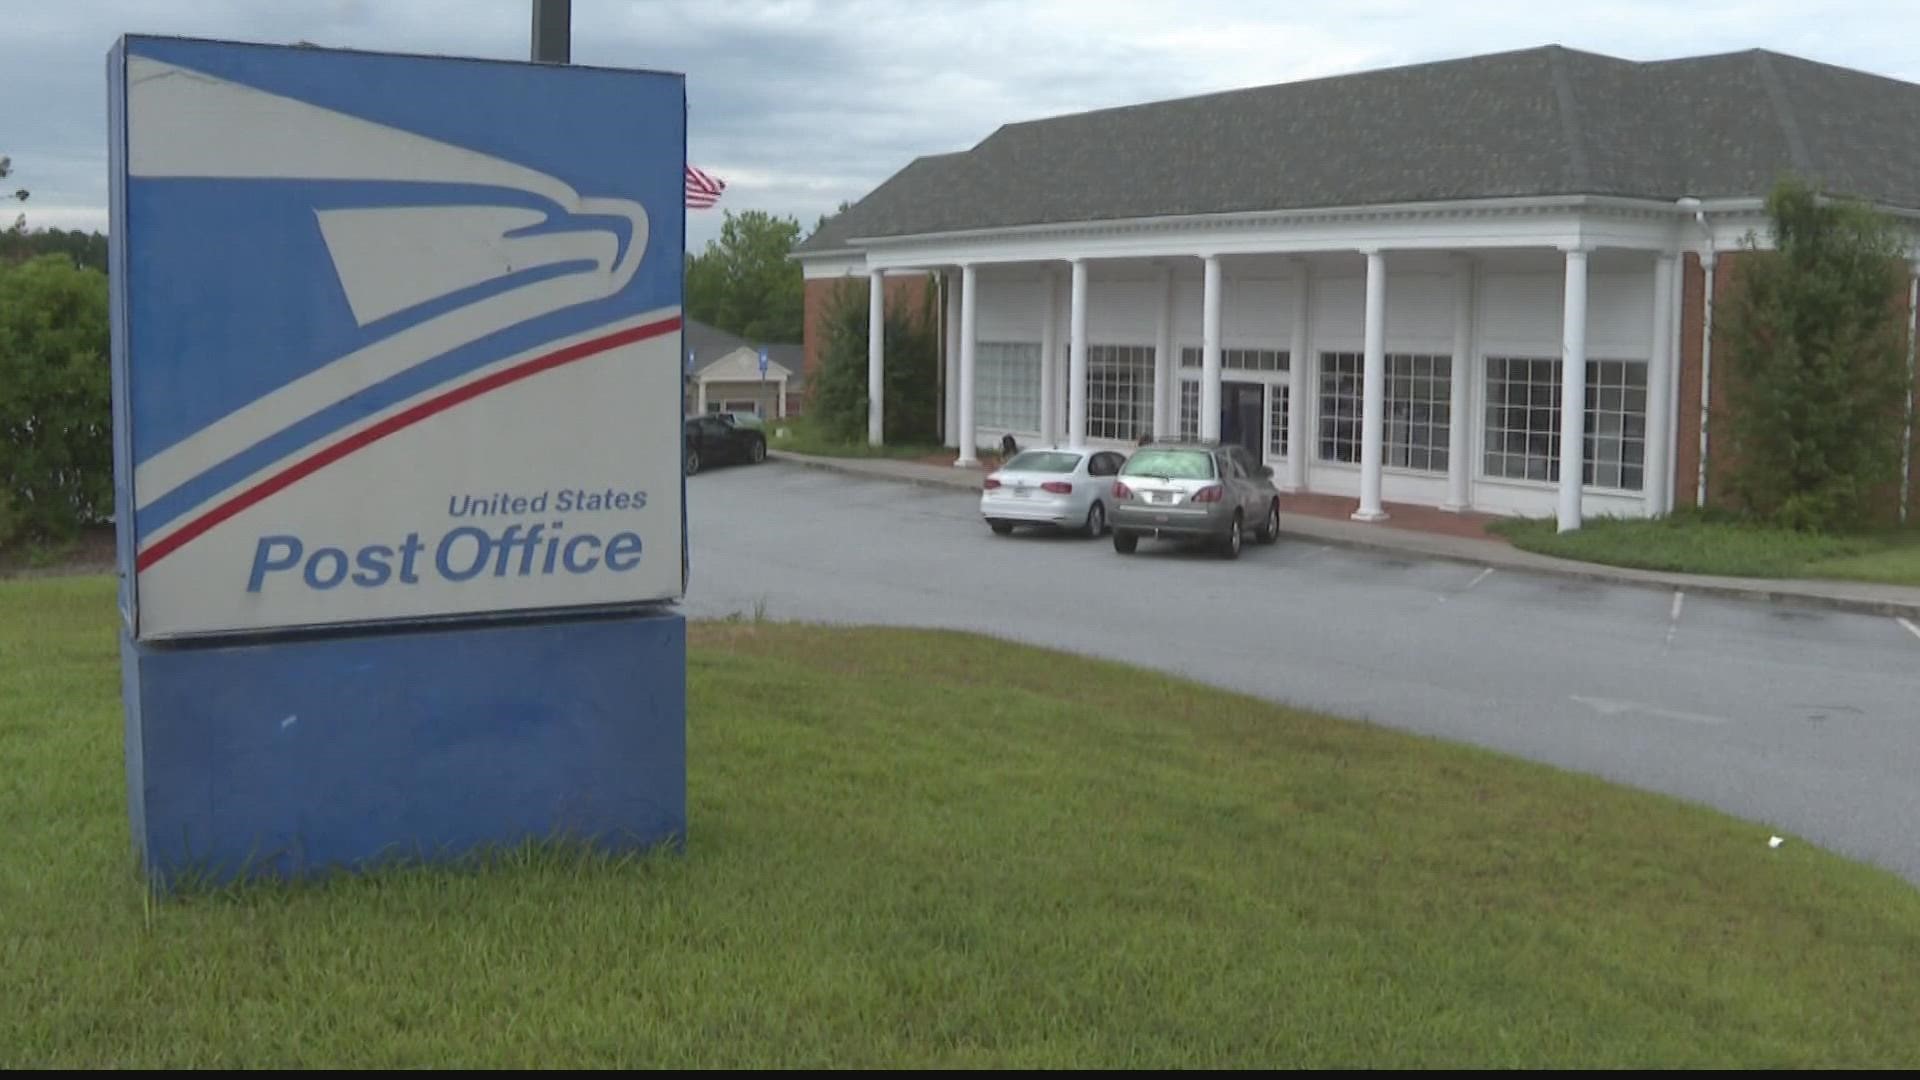 More complaints of checks disappearing from the U.S. Mail. Checks that were mailed but then vanished before they were delivered at a post office in Dunwoody.